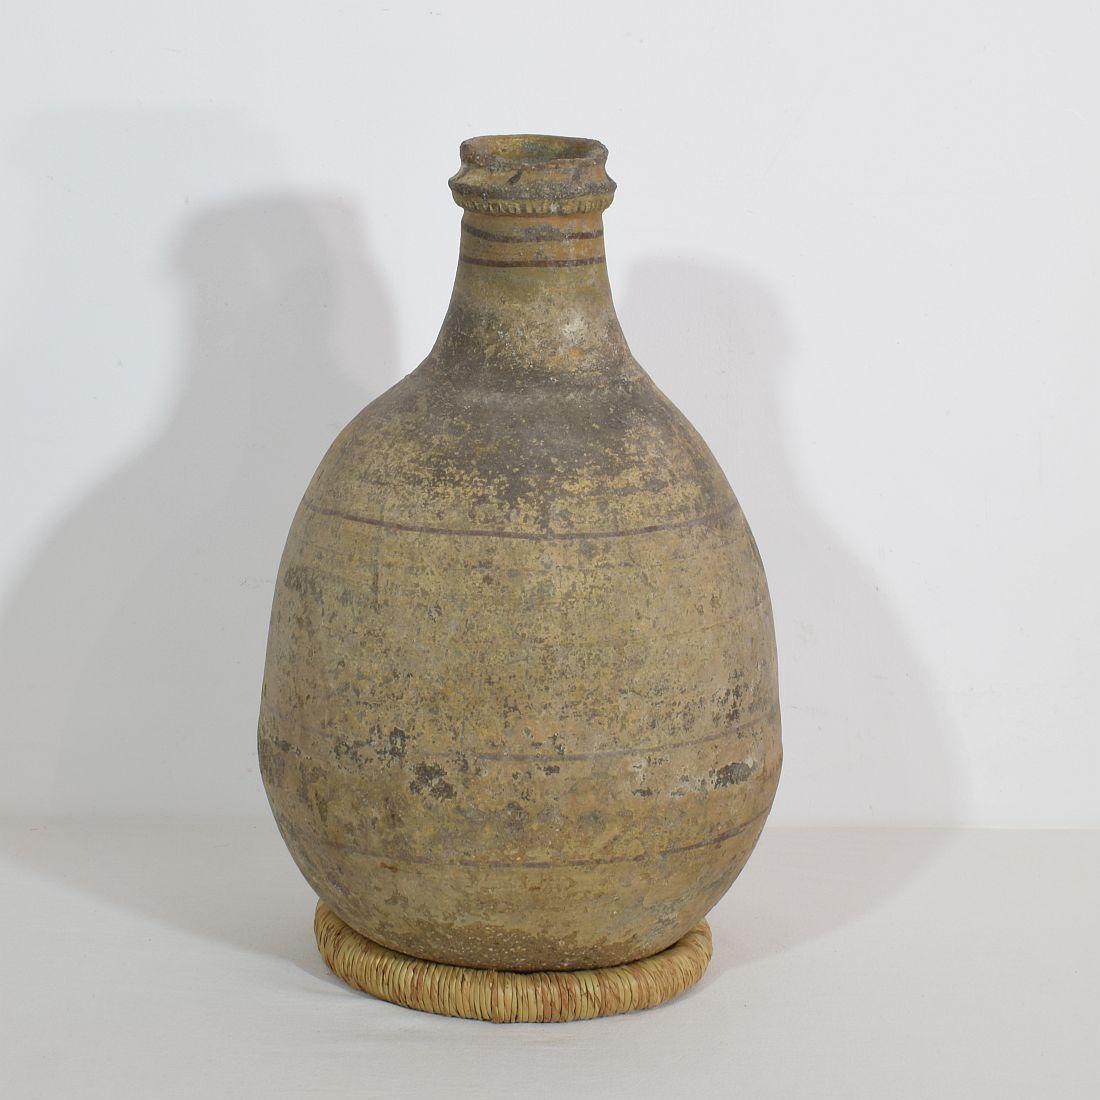 Hand-Crafted 19th Century Moroccan Earthenware Jug